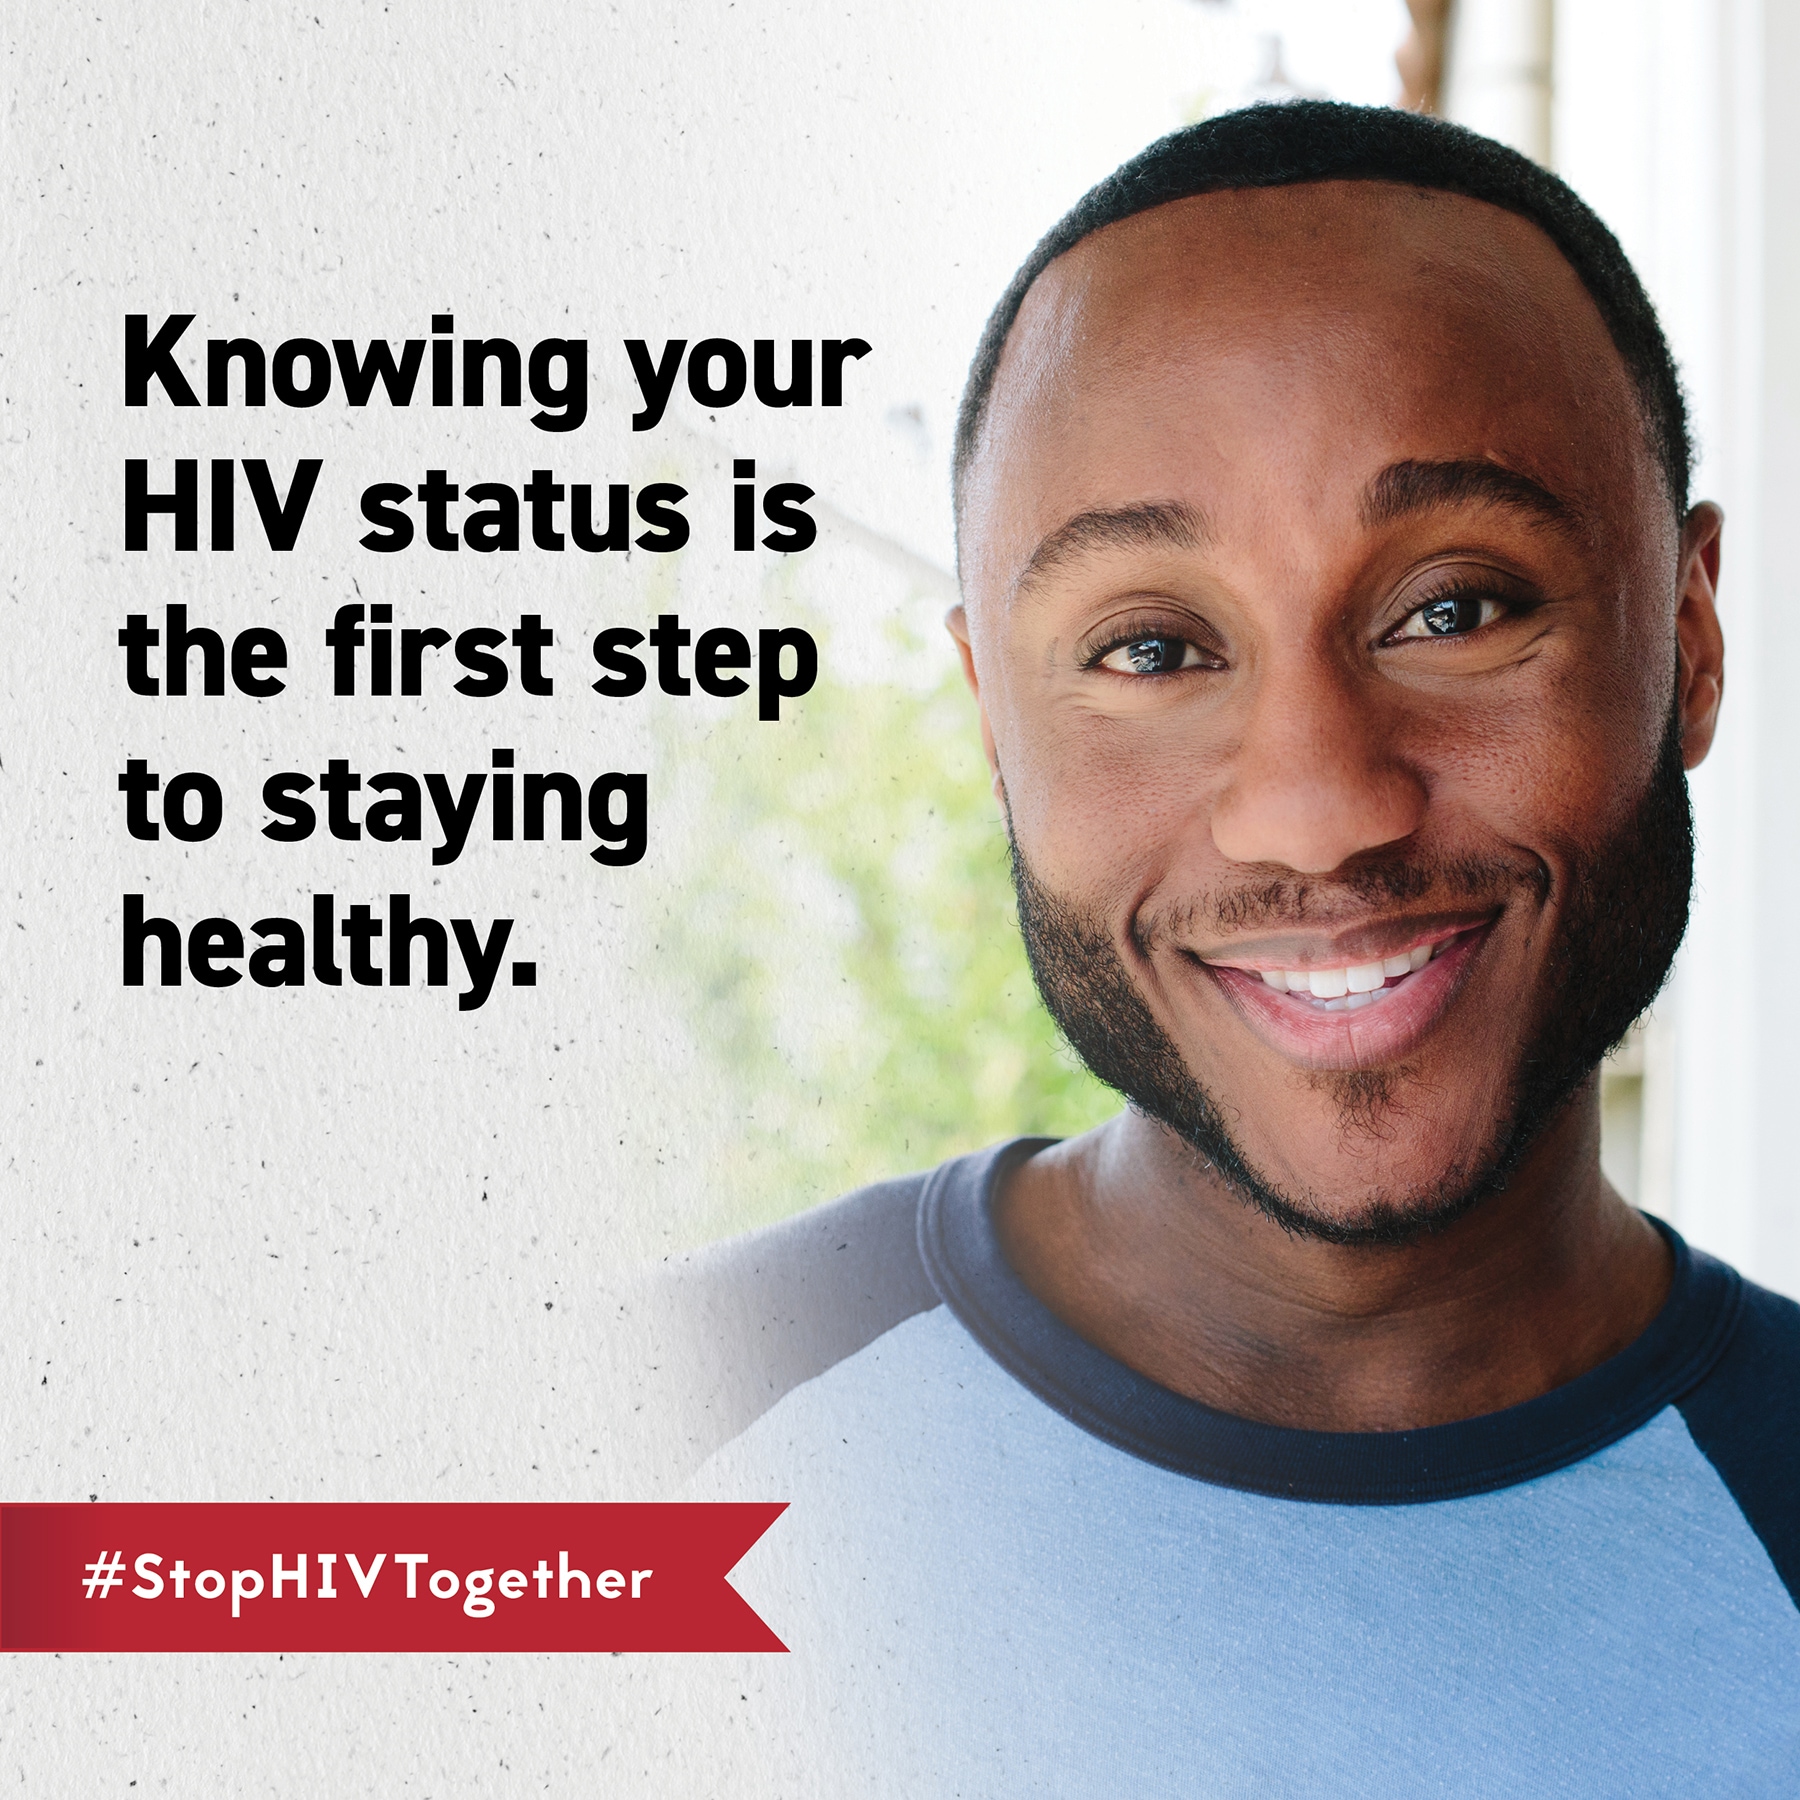 Knowing your HIV status is the first step to staying healthy.